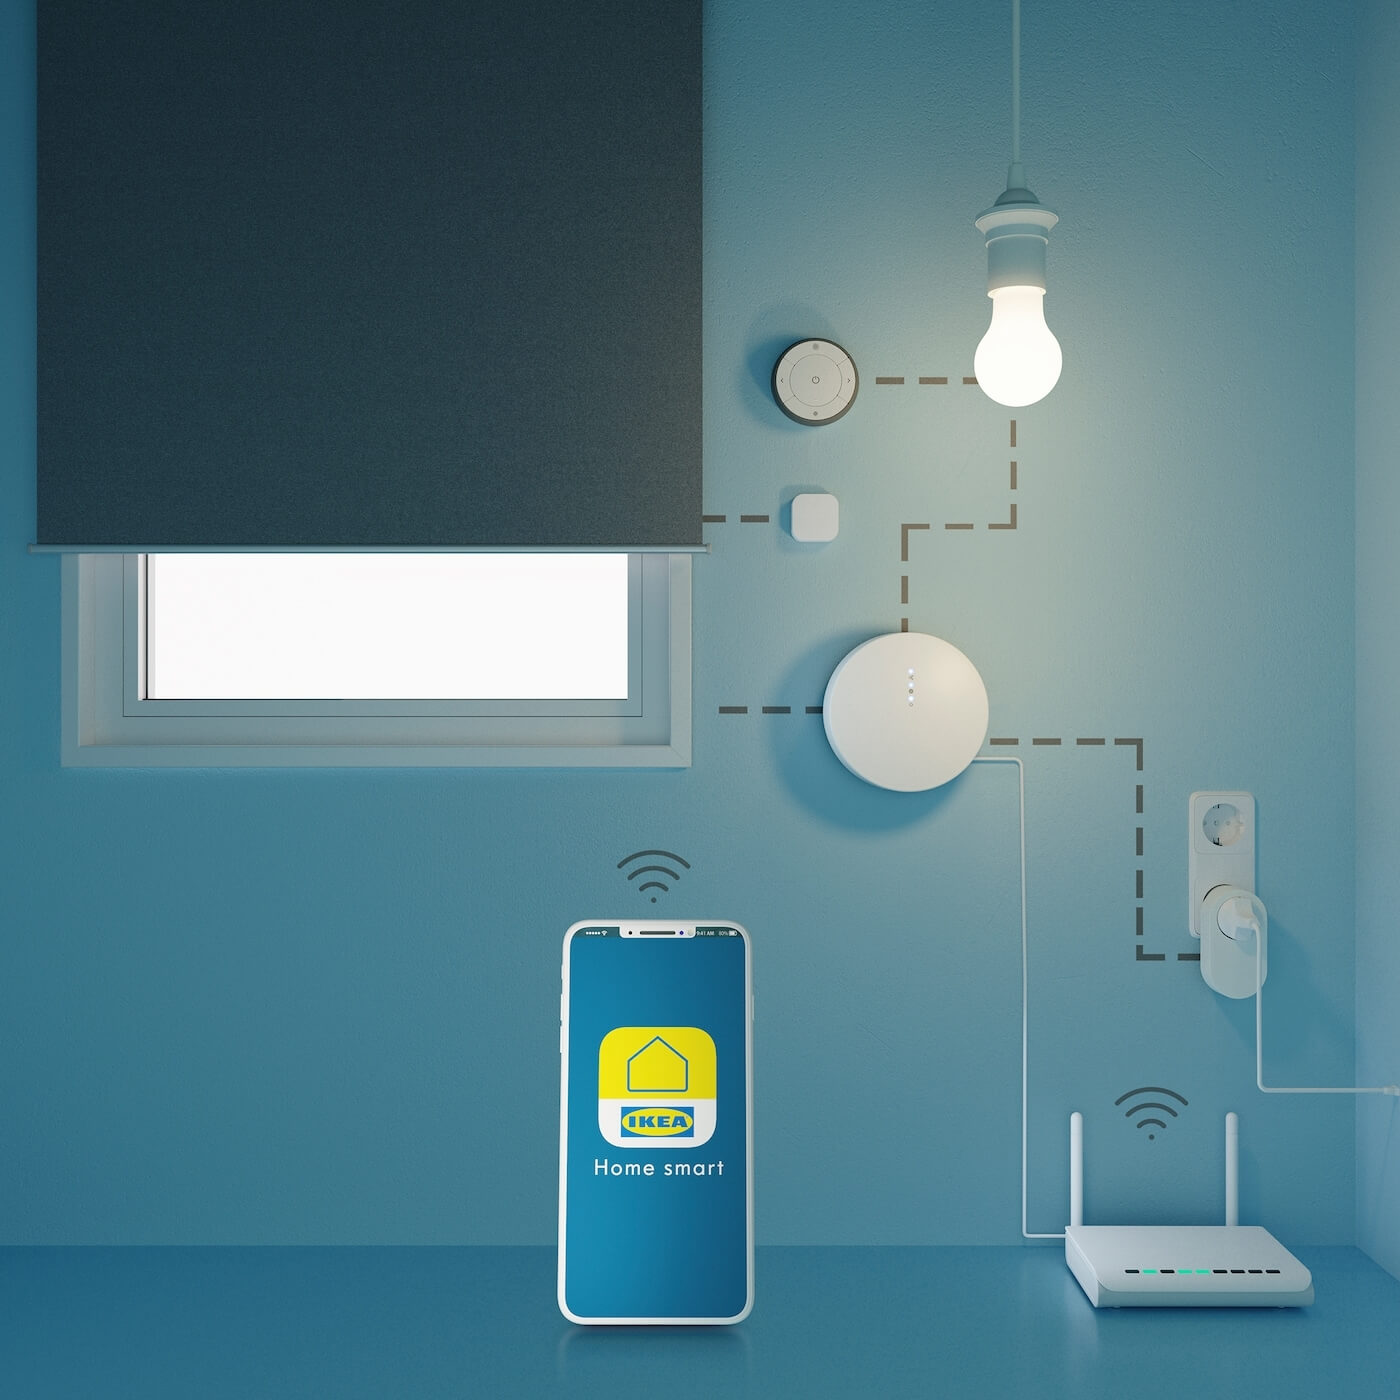 Home Smart products by IKEA